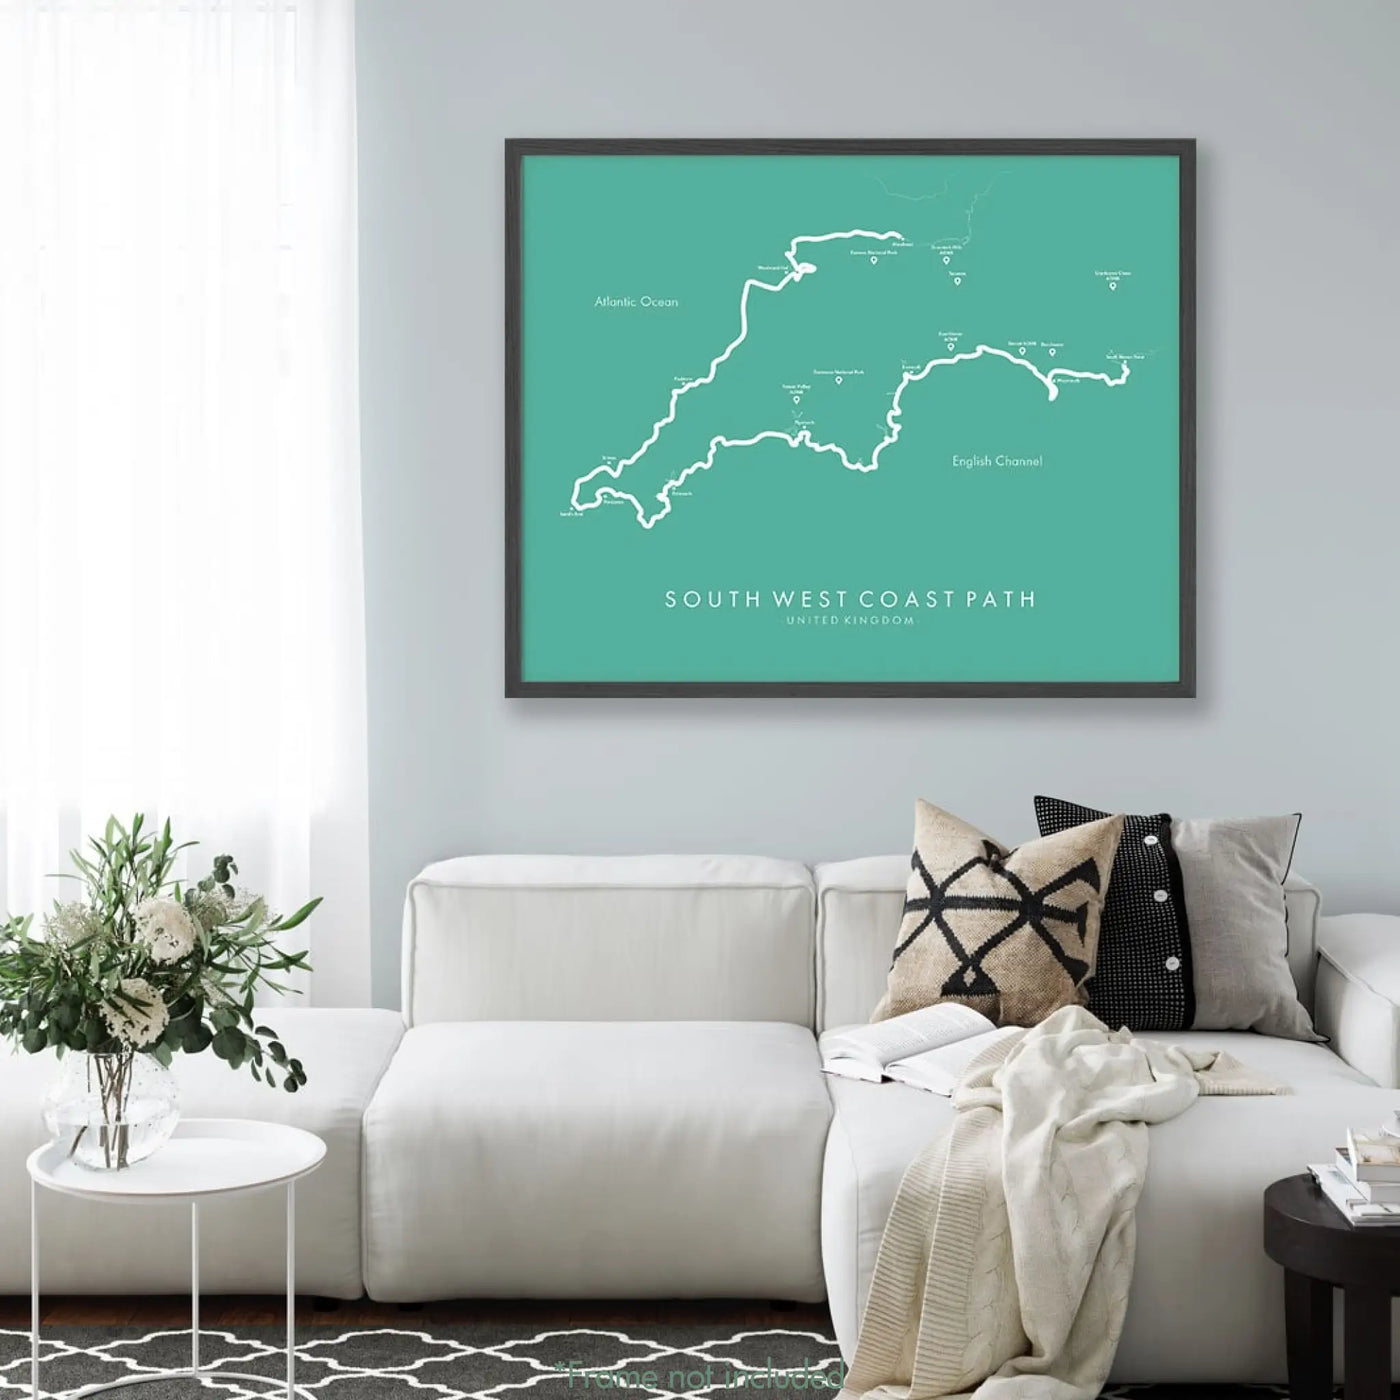 Path Poster of South West Coast Path - Teal Mockup